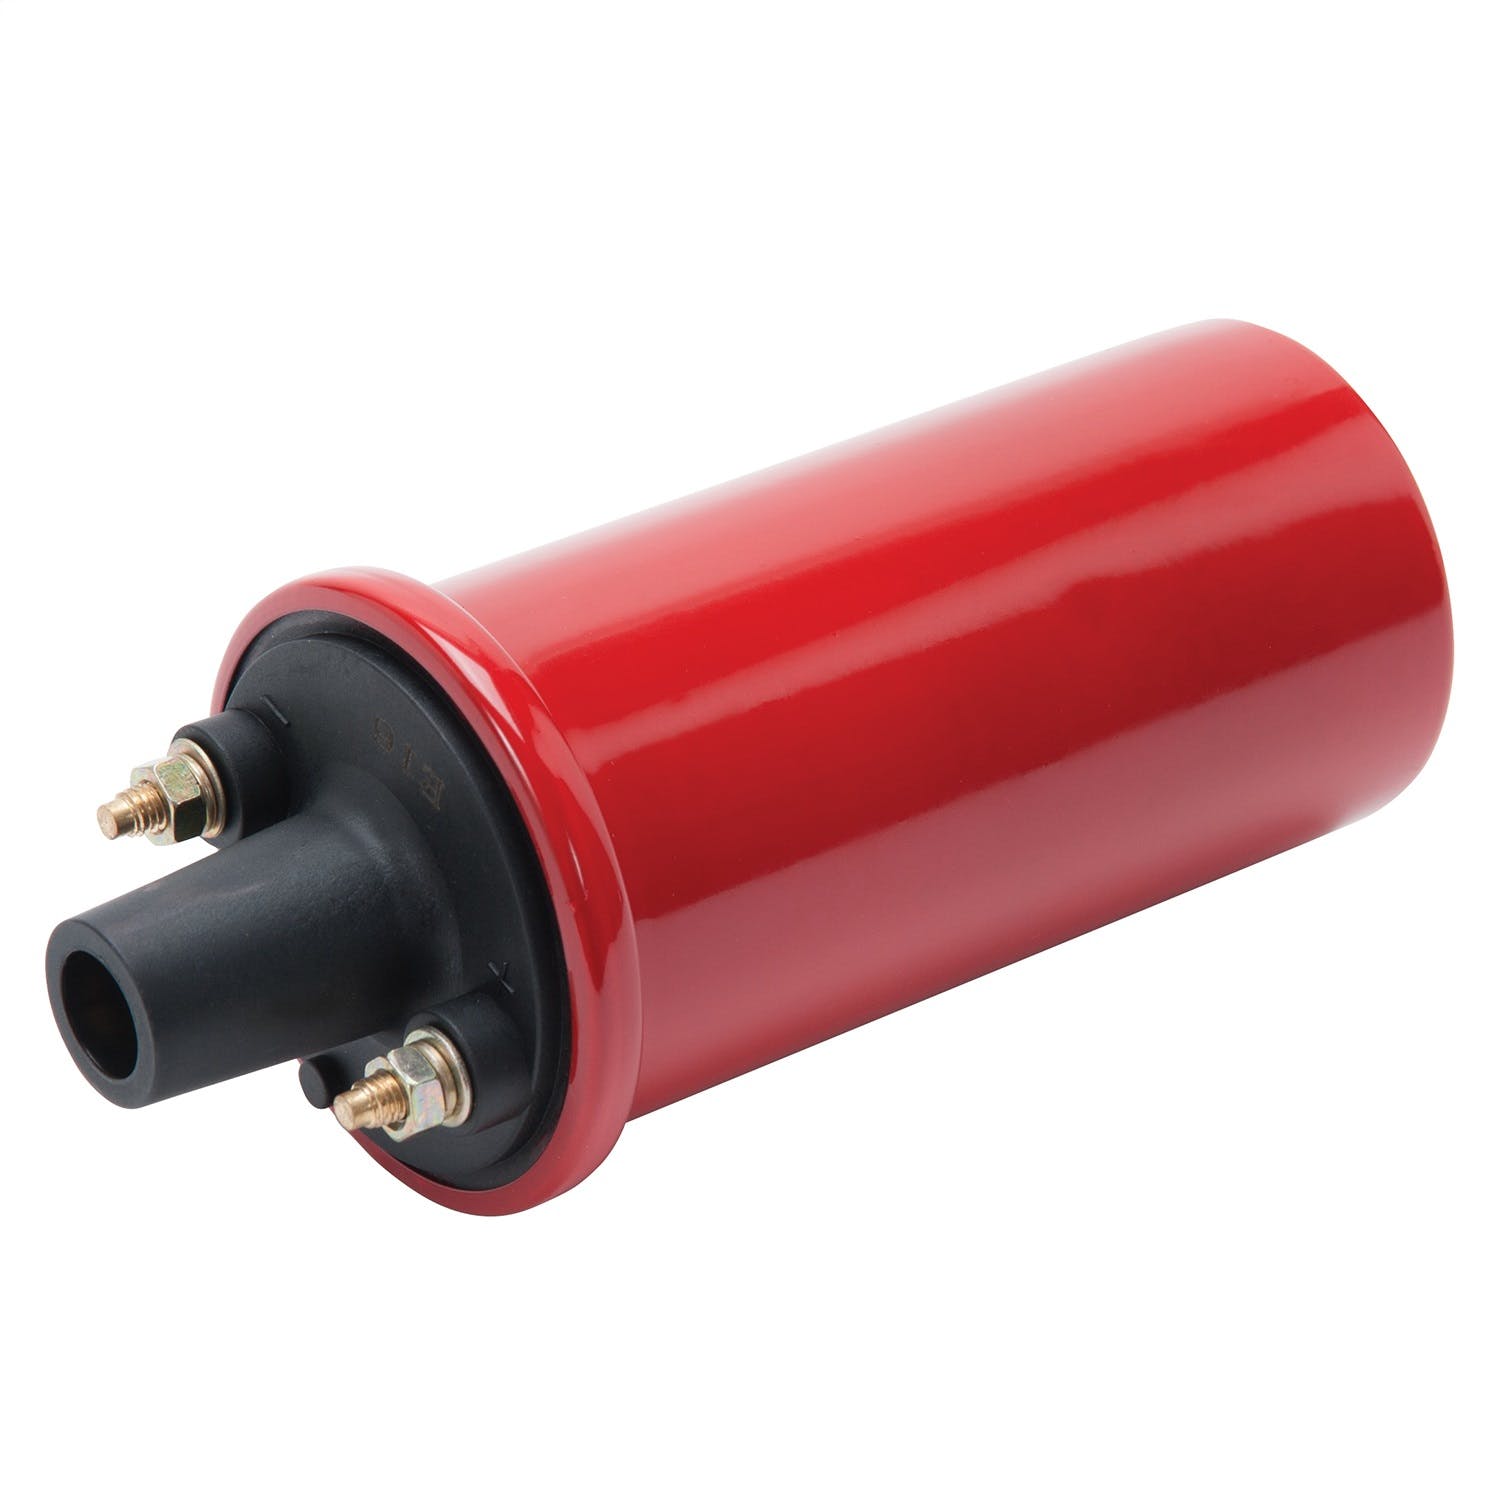 Edelbrock 22741 Max-Fire Ignition Electronic Oil Filled Ignition Coil in Red Finish (0.45 PR)